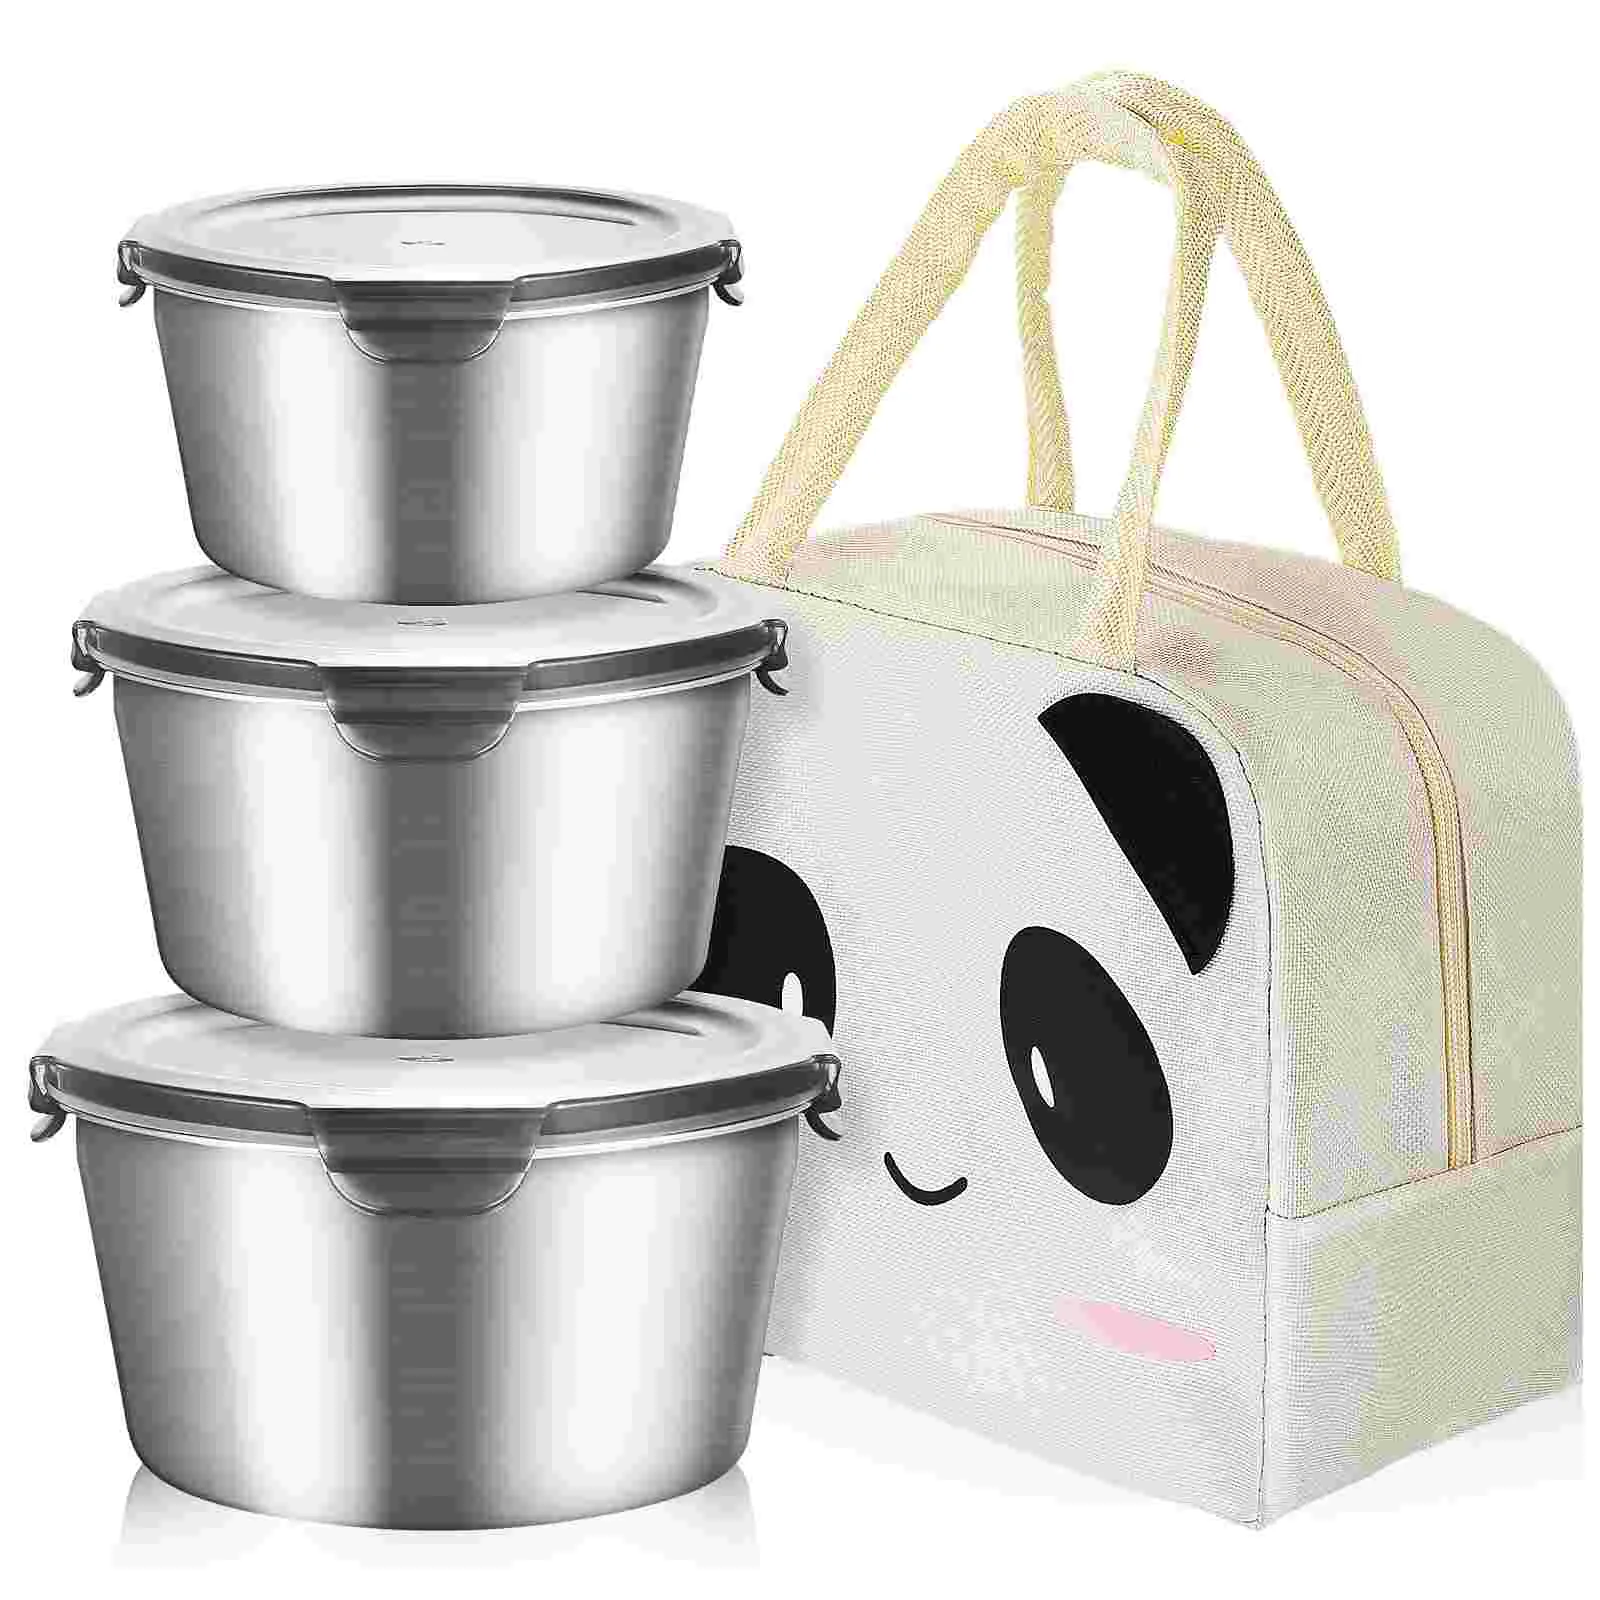 

3Pcs Bento Lunch Box 400/600/1100ML Stainless Steel Food Containers with Bag for Kitchen Picnic